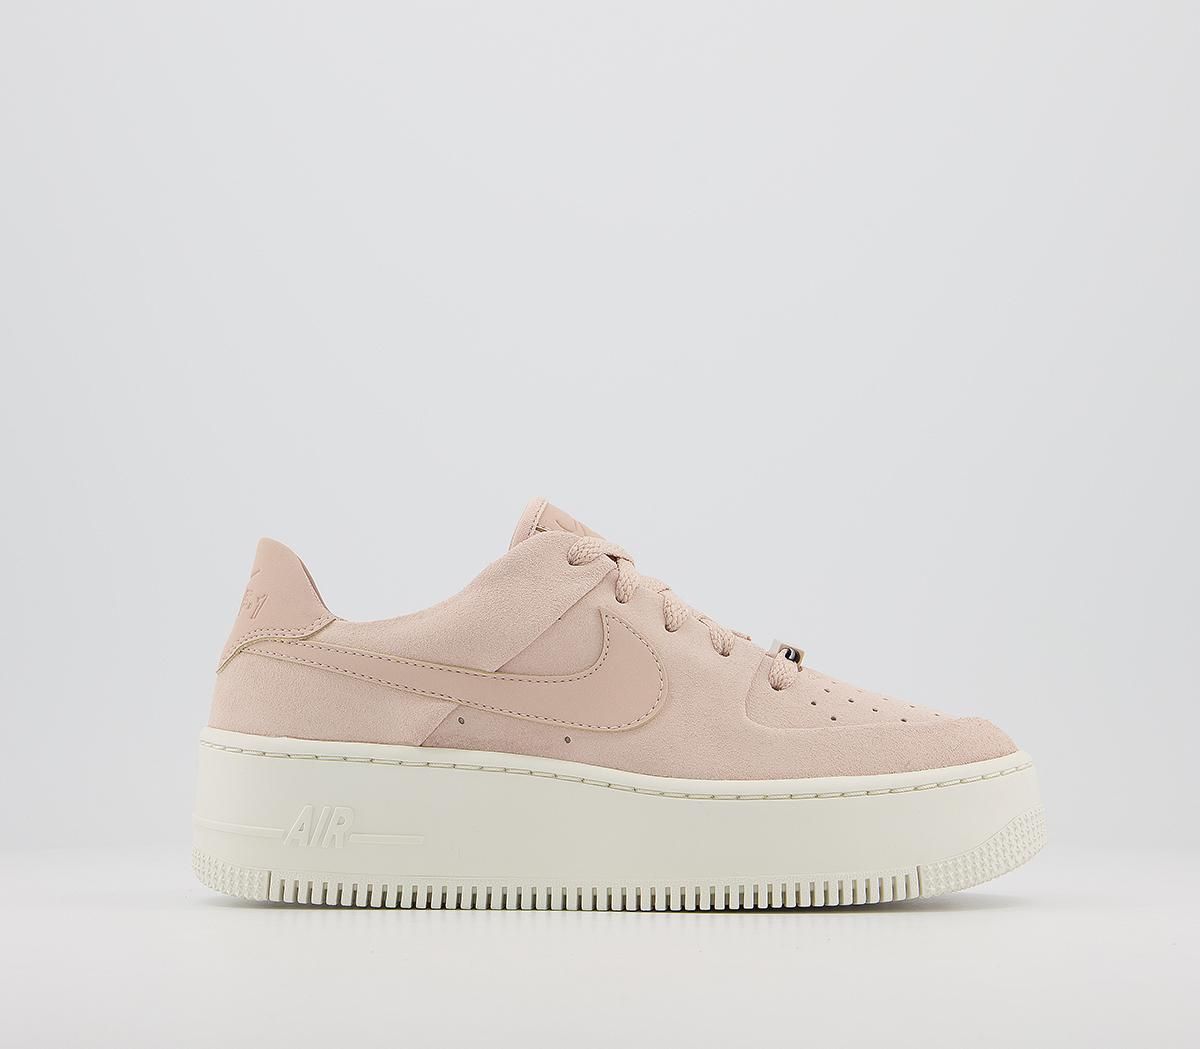 Nike Air Force 1 Sage Trainers Particle Beige Phantom - Hers trainers | OFFICE London (UK)